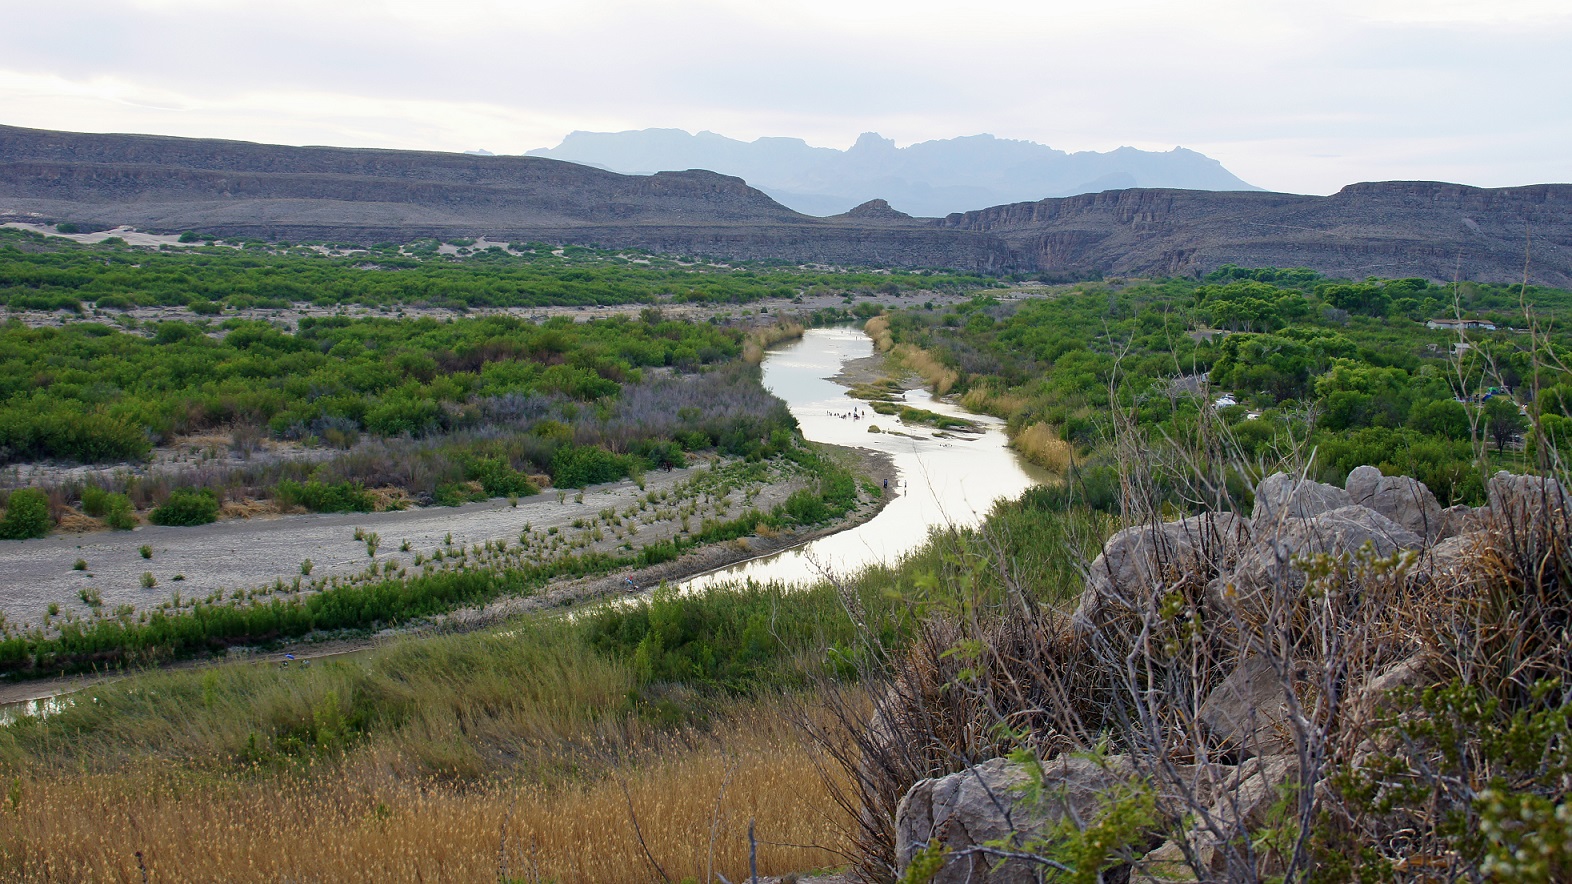 Scenic desert landscape of Big Bend National Park showing river with mountains in the background.